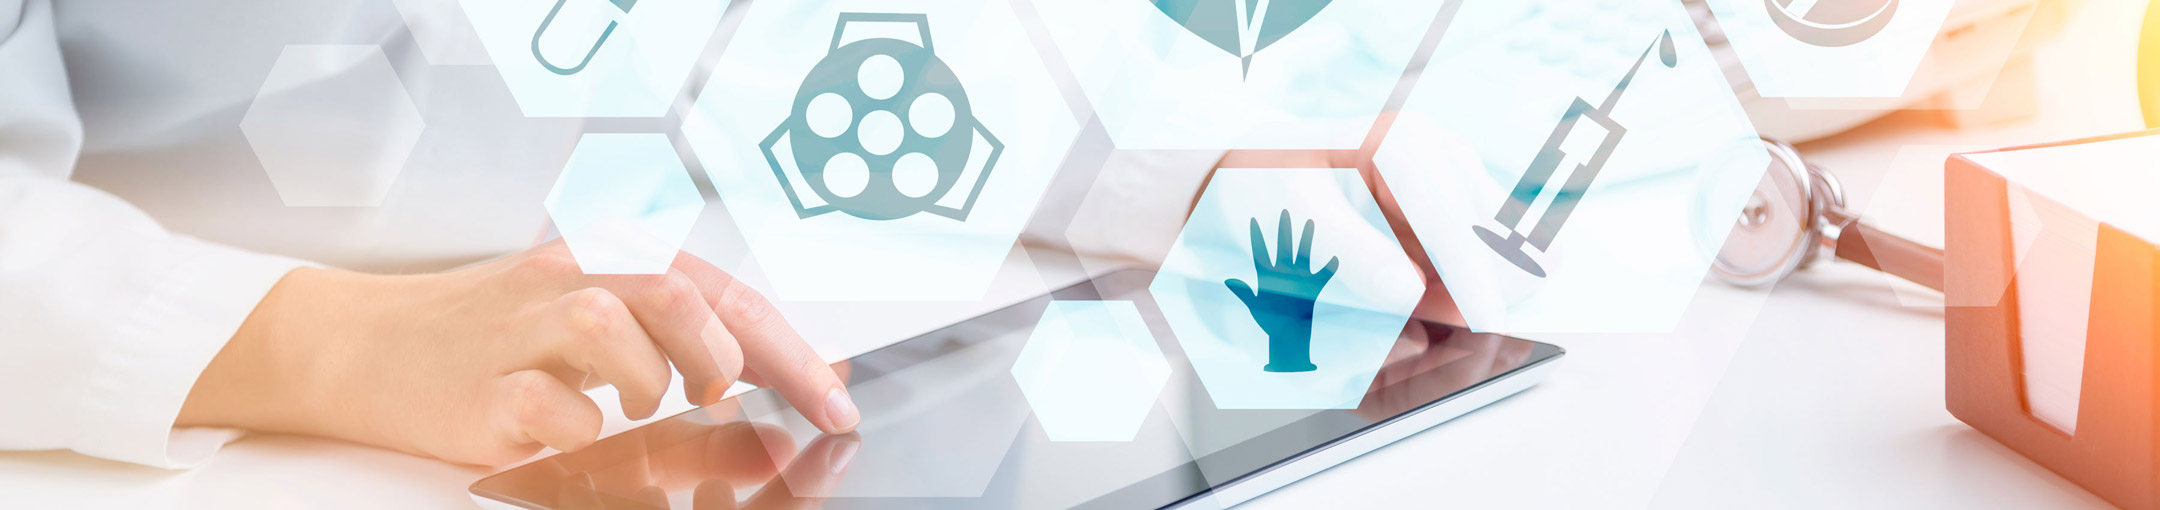 A hand uses a tablet computer. Various medical icons overlay the photo.